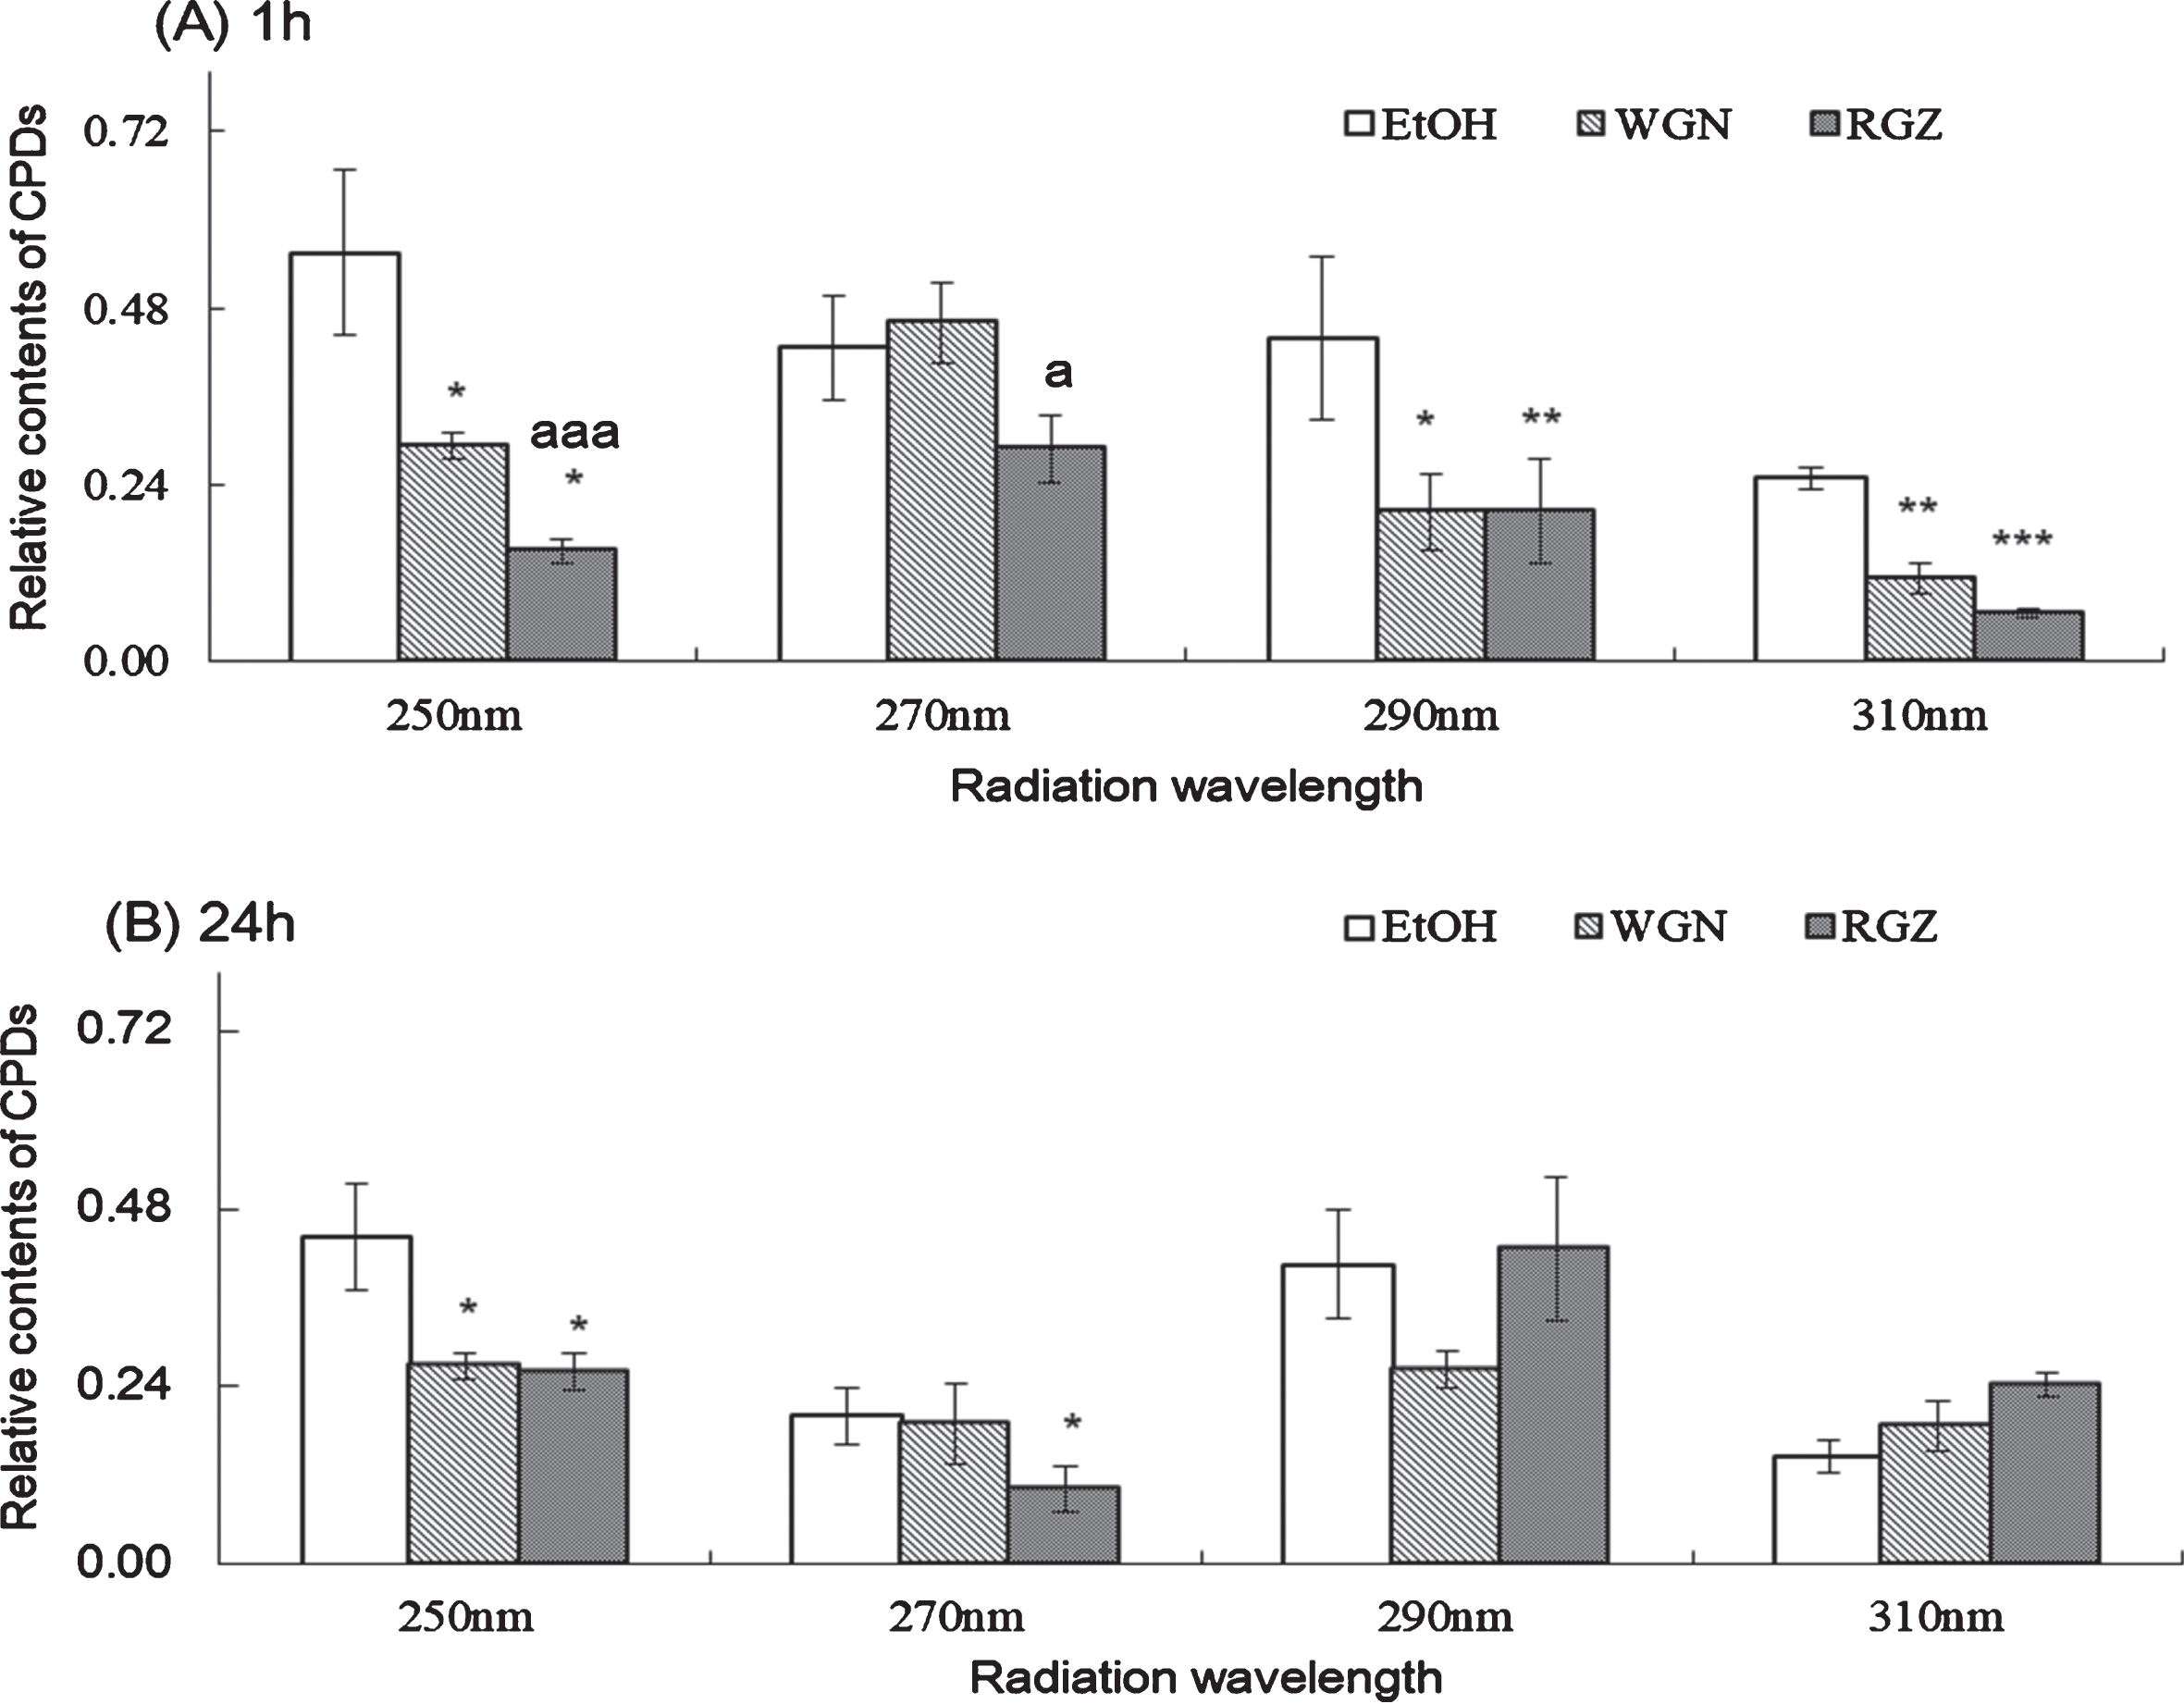 CPD formation in NHEK cells treated with ethanol, WGN extract and RGZ extract 1 h (A) or 24 h (B) after UV irradiation at 4 different wavelengths (250 nm, 270 nm, 290 nm, and 310 nm). Asterisks denote significant difference *:p < 0.05, **:p < 0.01, ***:p < 0.001 compared to the NHEK cells treated with EtOH. “a” and “aaa” denote significant changes between WGN and RGN in each wavelength, and mean p < 0.05 and p < 0.001, respectively. In control group treated without UV, ethanol was added instead of GSEs. GSEs were obtained as described in method 1, section 2.2. Error bars indicate SEM (n = 3).